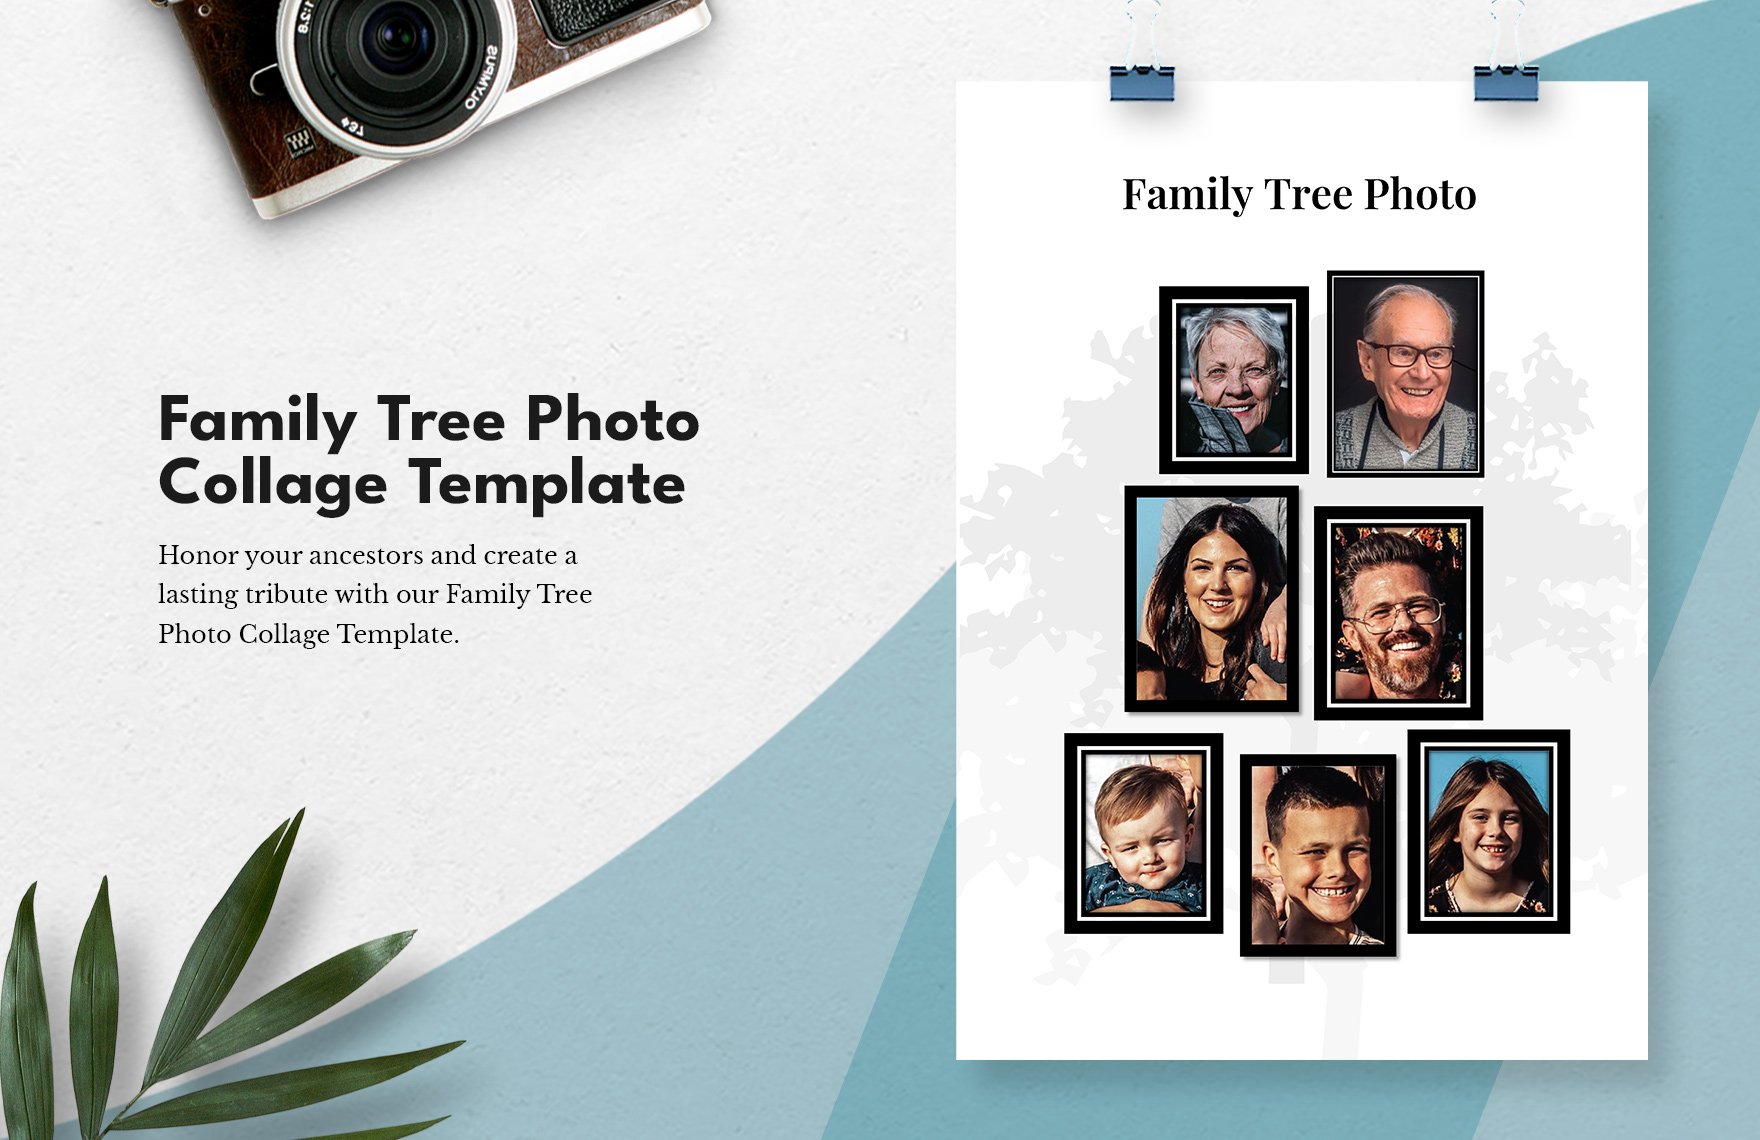 Family Tree Photo Collage Template